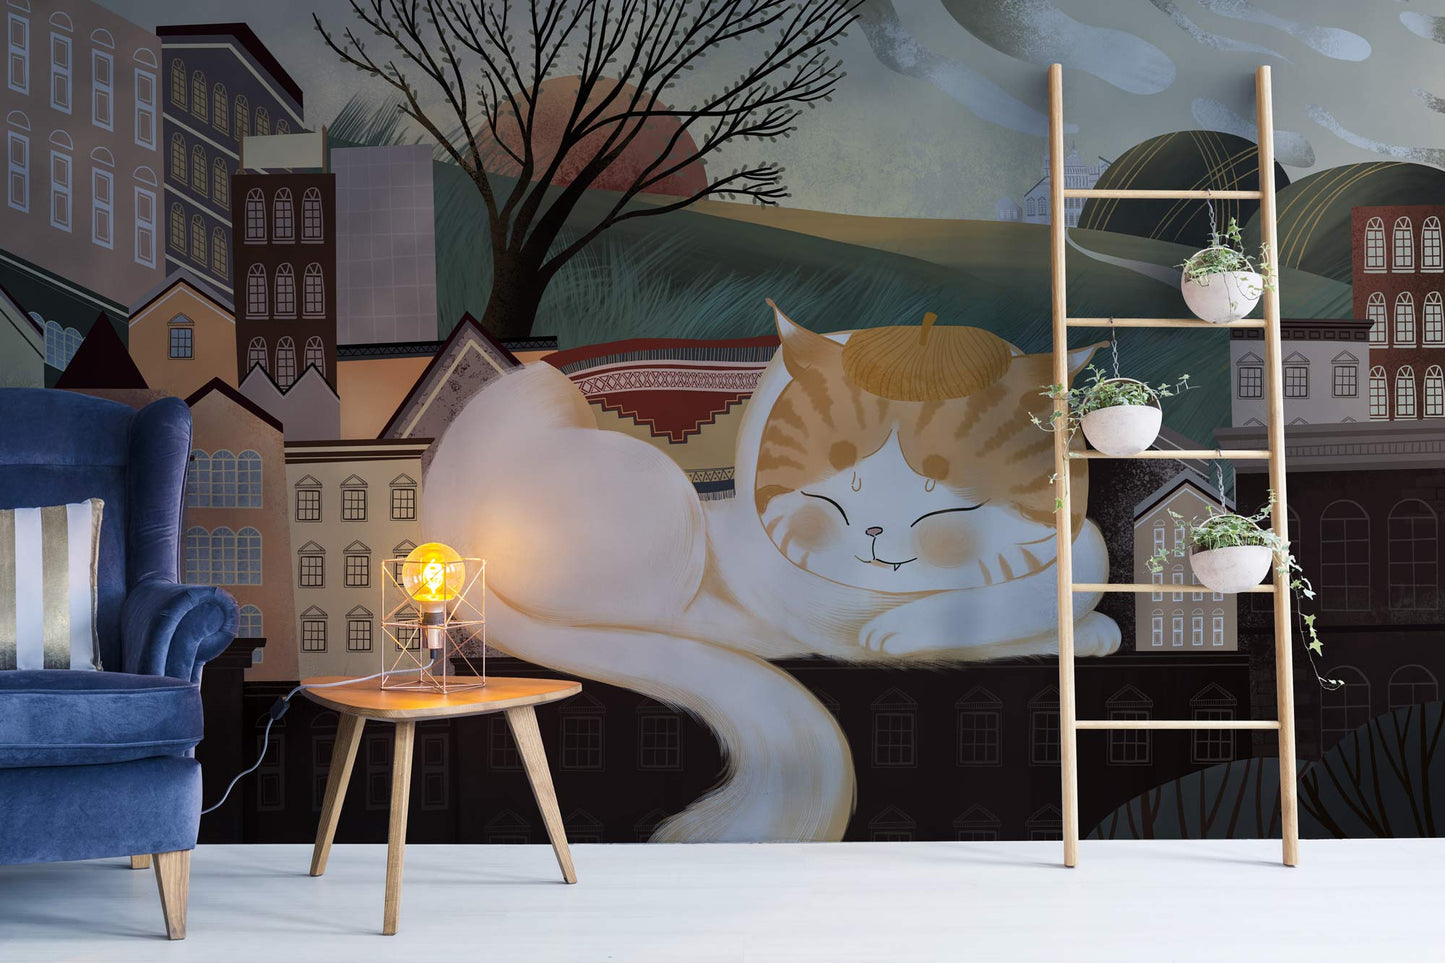 Wallpaper Mural of a Cat Sleeping on a Rooftop